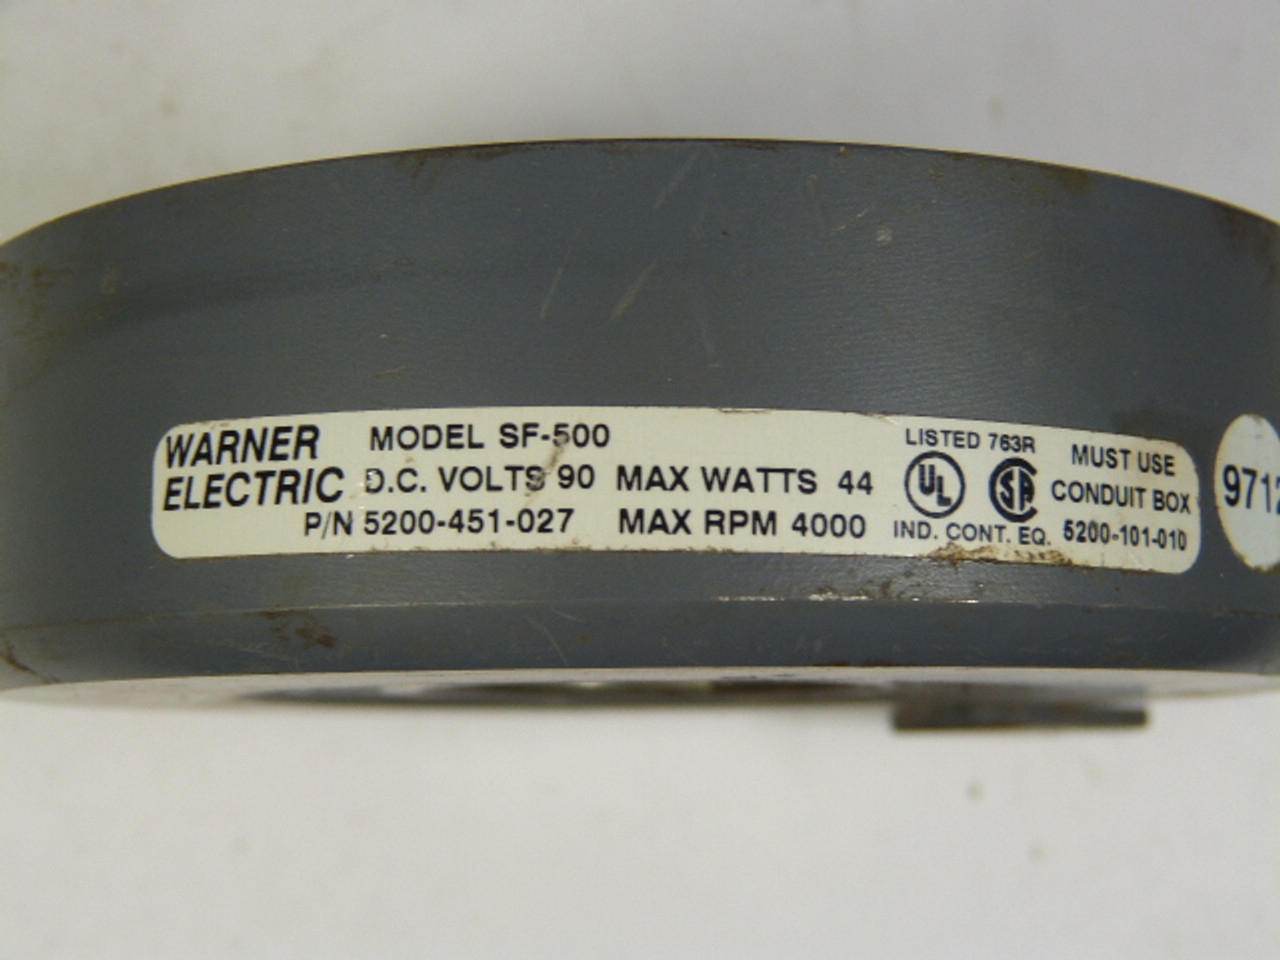 Warner 5200-451-027 Field & Bearing Assembly 90VDC 4000RPM 44W USED